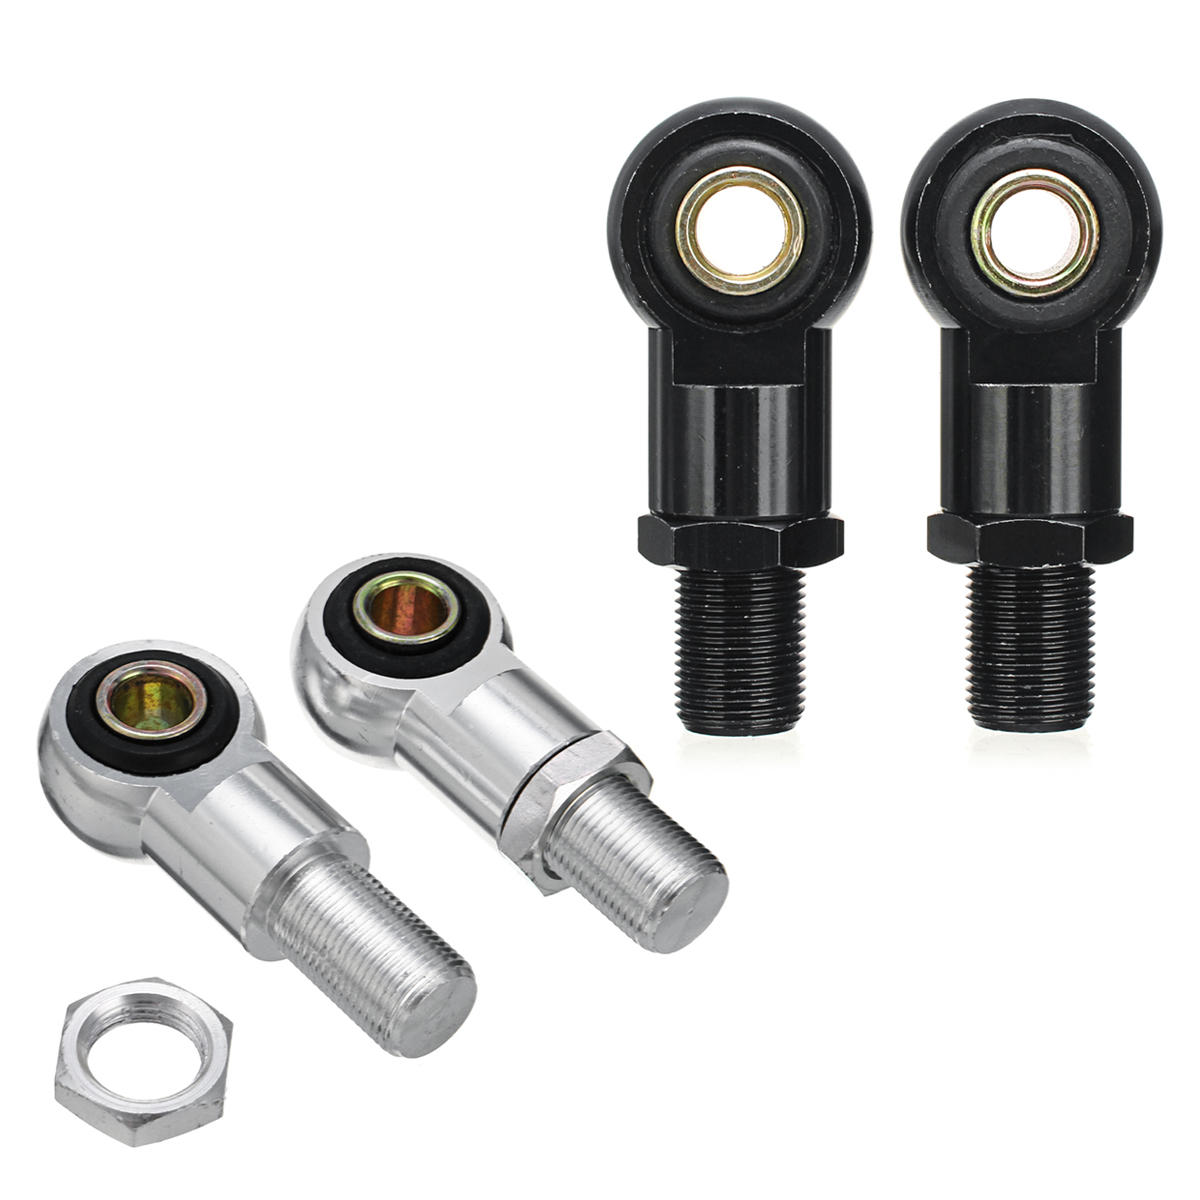 

12mm Eye Adapter Eye End For Shock Absorber 340mm Motorcycle Scooter ATV